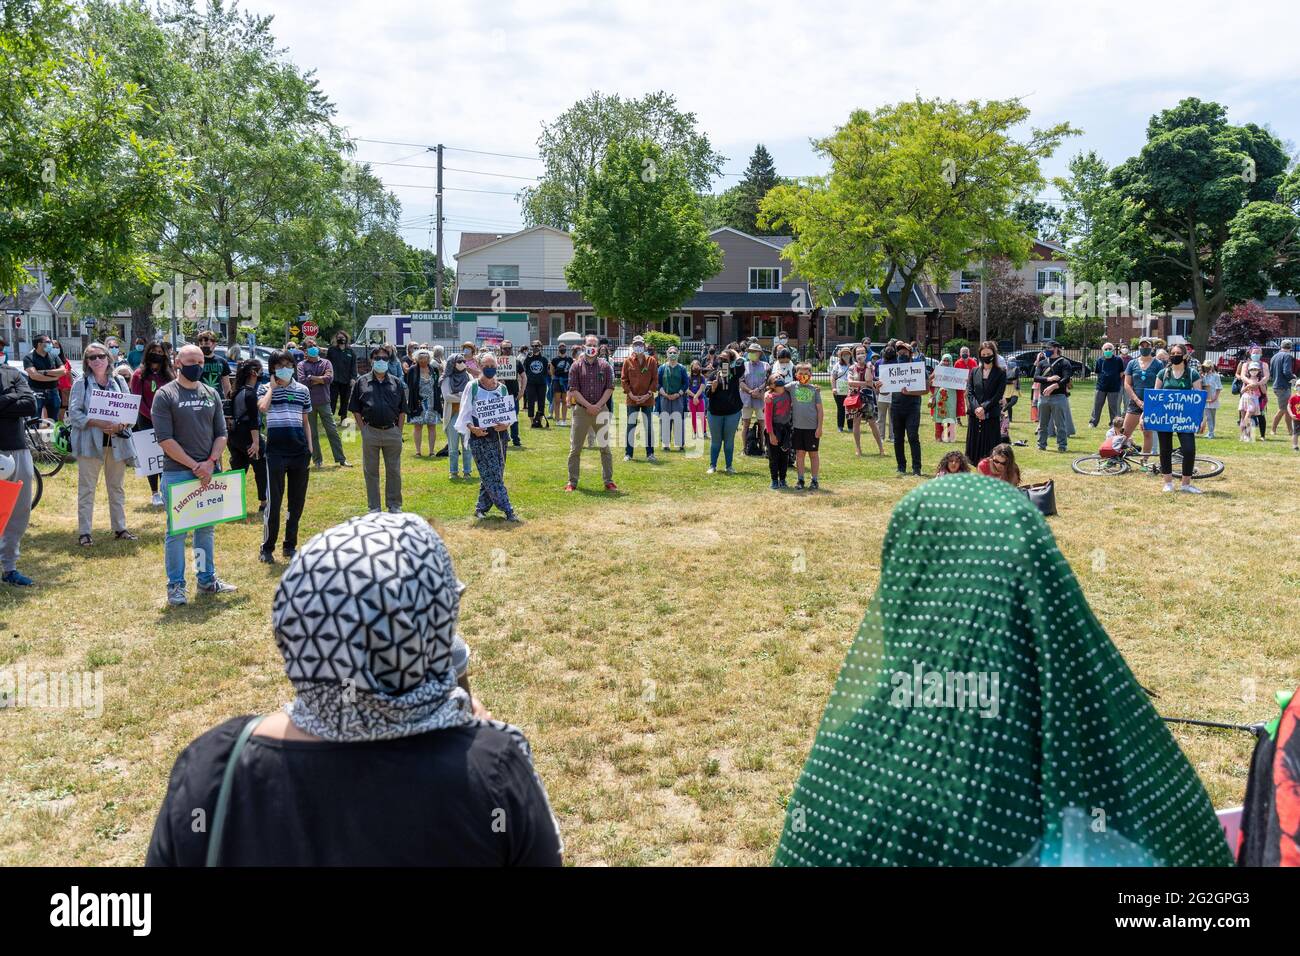 Toronto, Canada-June 11, 2021: A walk against hate was held in the Danforth district in solidarity with the family killed in London, Ontario earlier t Stock Photo